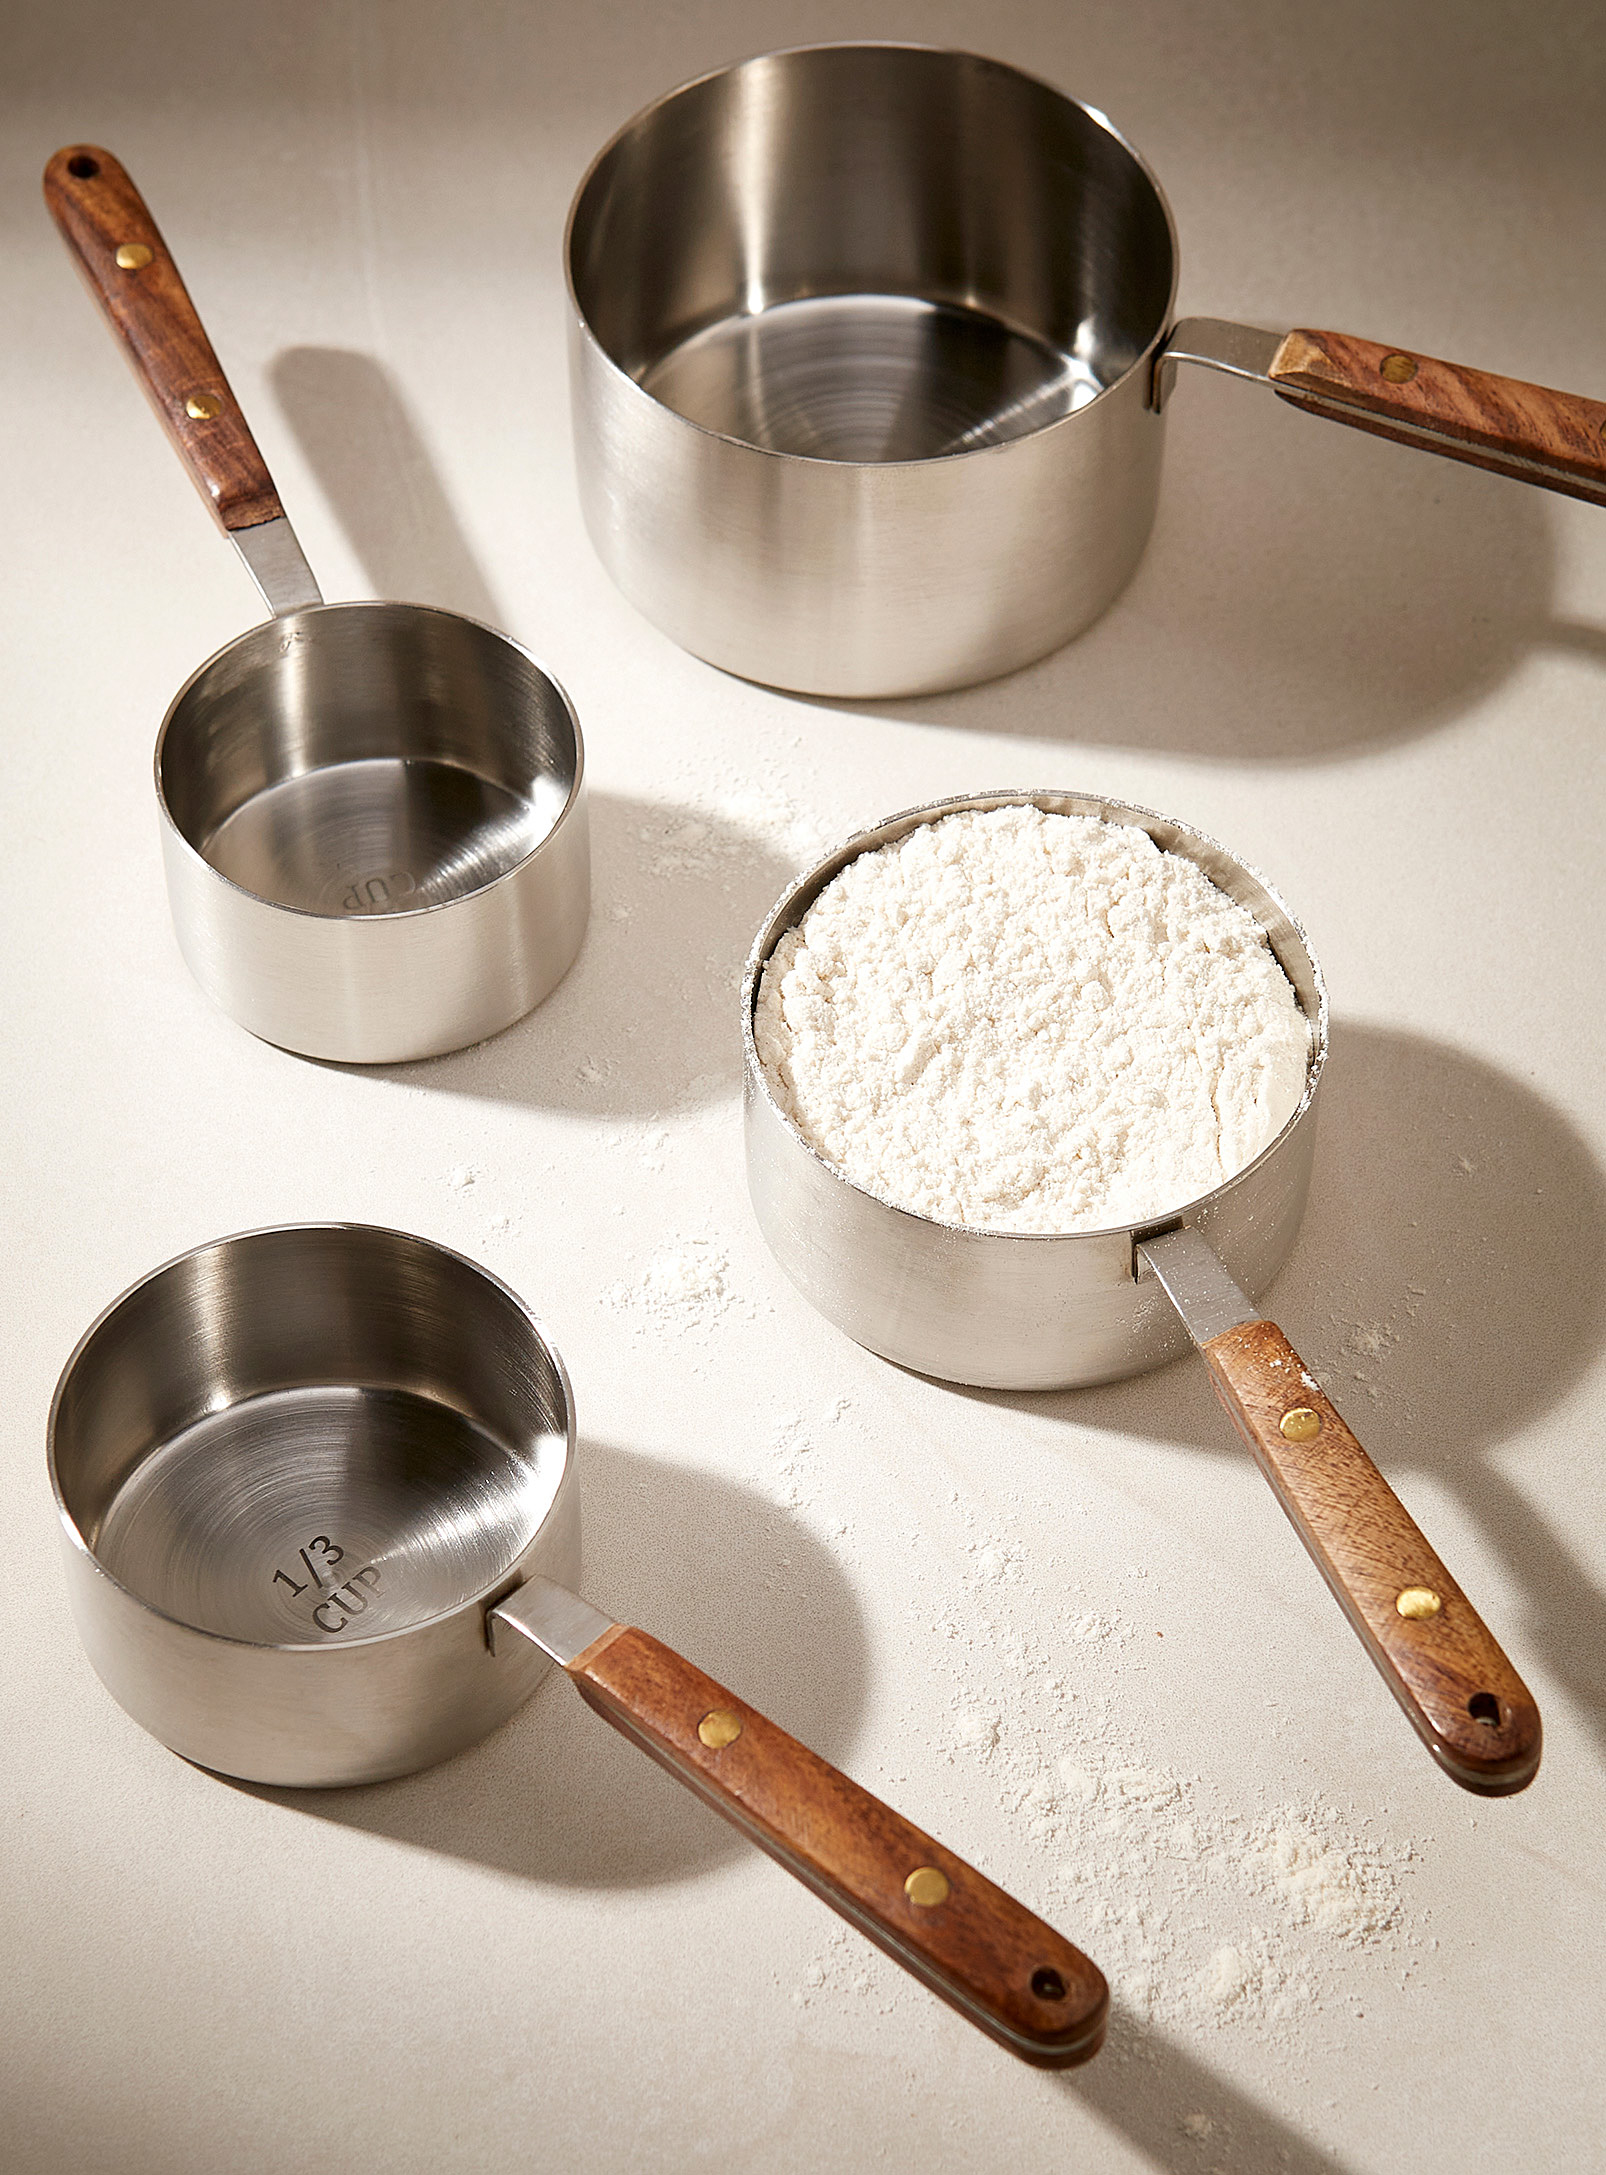 Simons Maison - Stainless sT-Shirtl and acacia wood measuring cups Set of 4